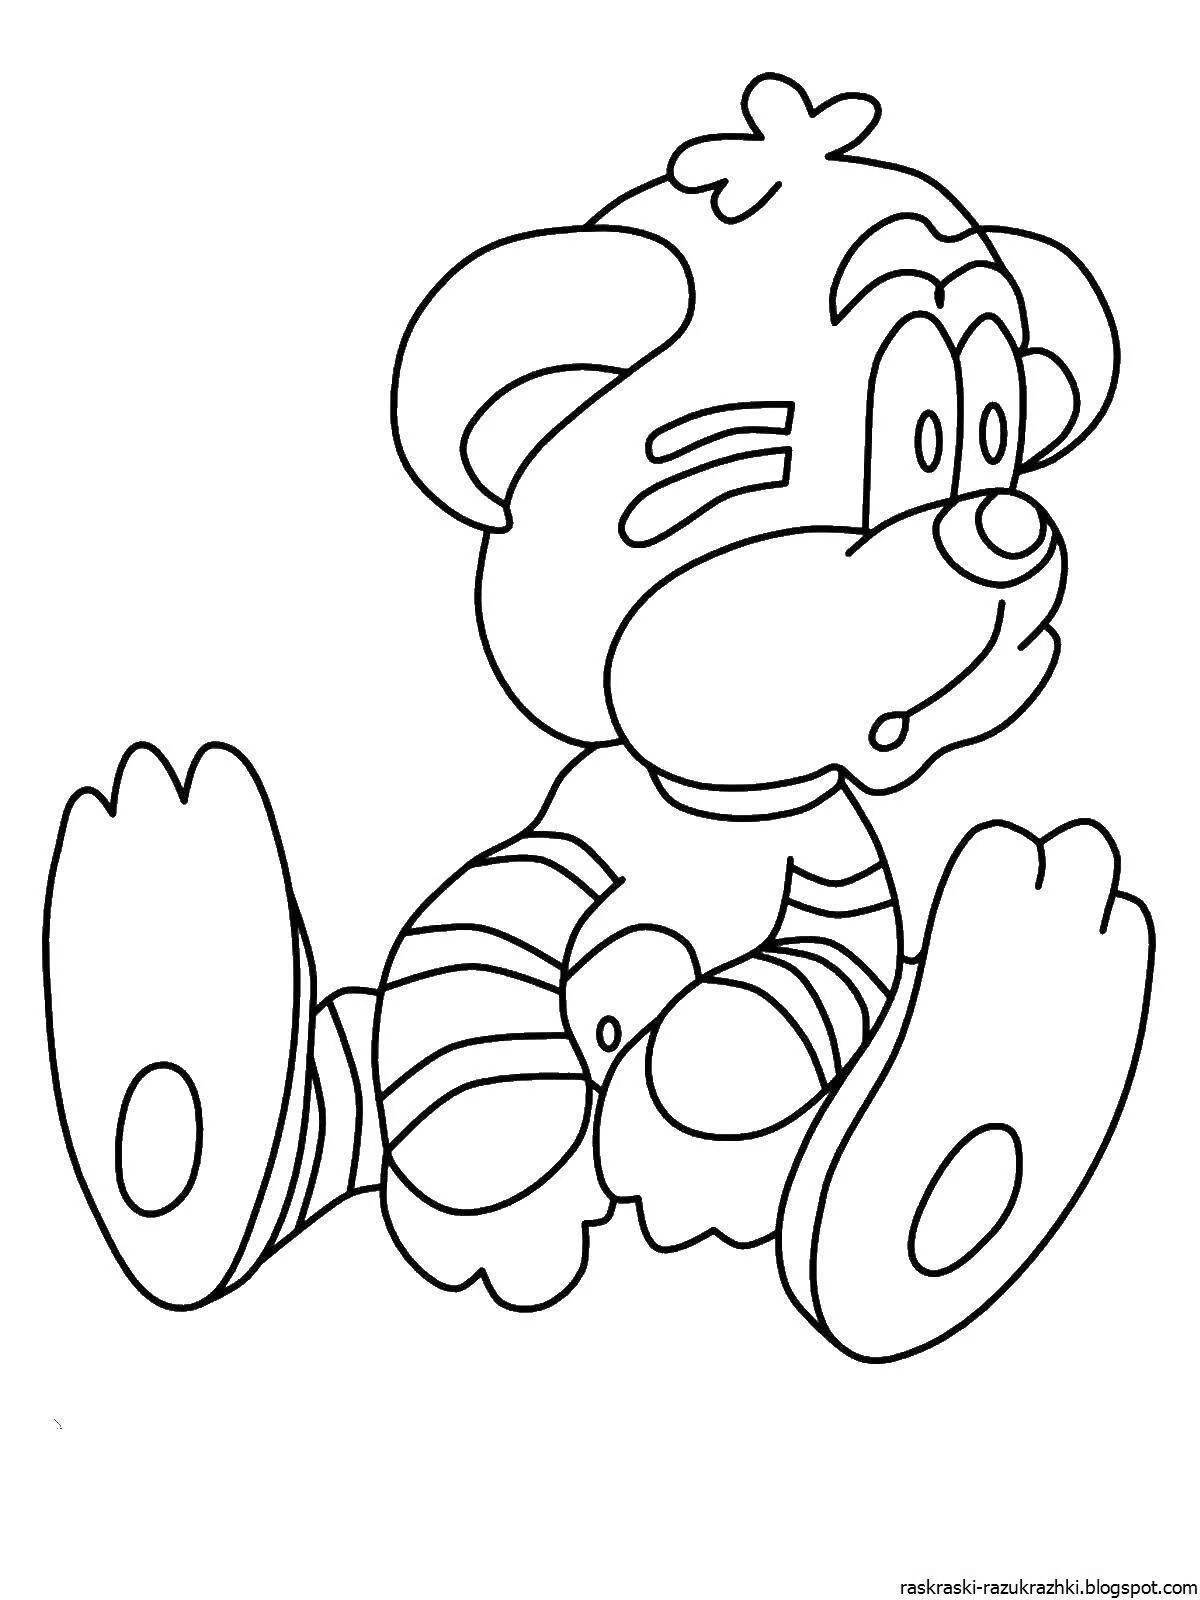 Fabulous cartoon characters coloring book for children 4-5 years old